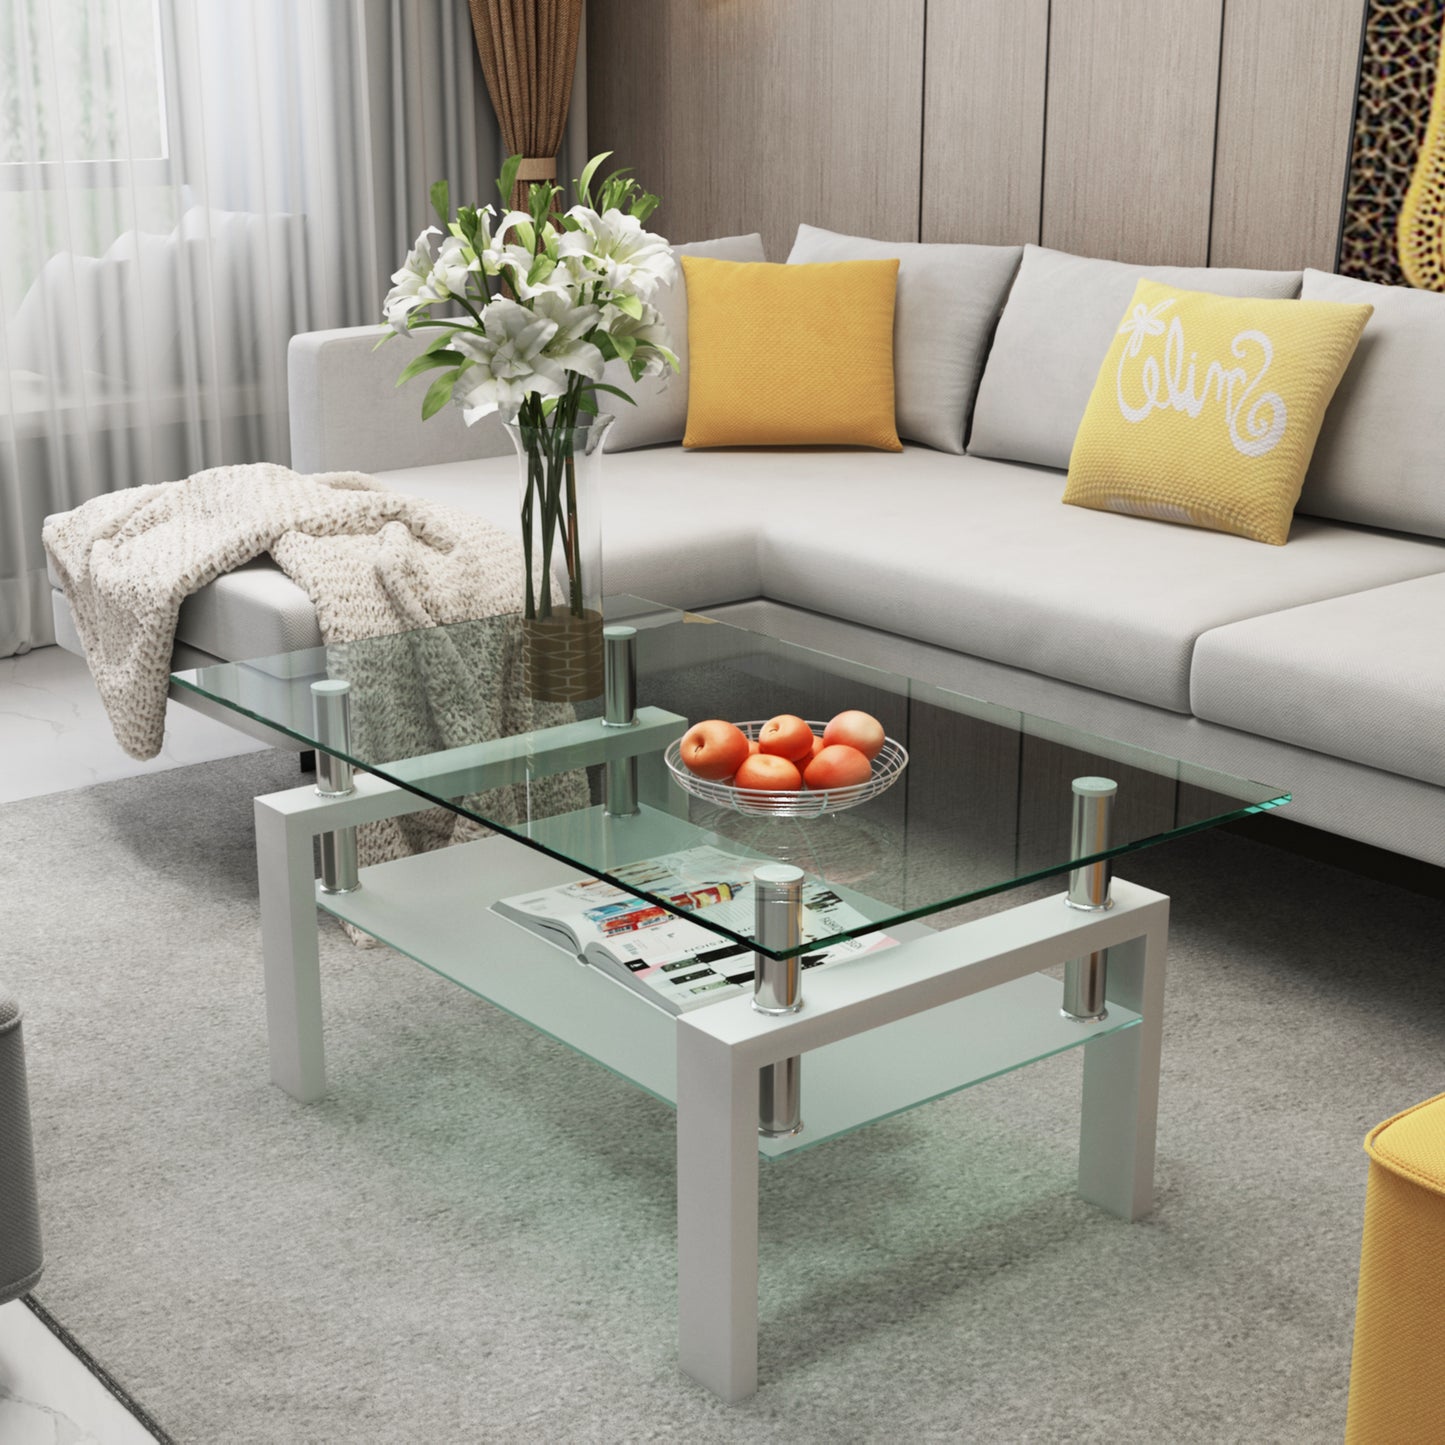 Elegant White Glass Coffee Table with Storage - Modern Living Room Furniture